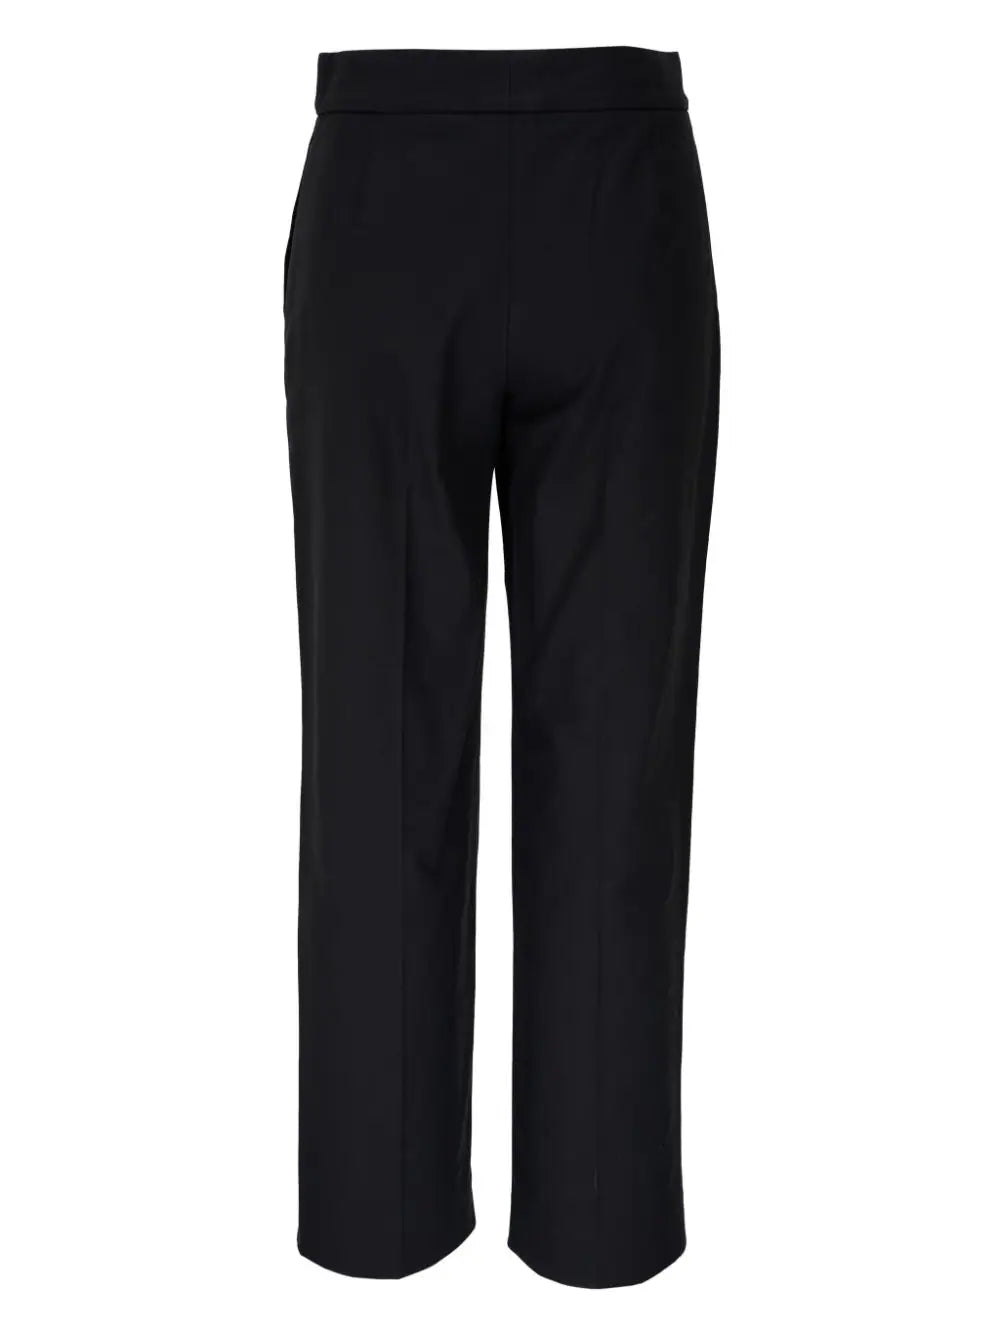 Nohan Pant in Black